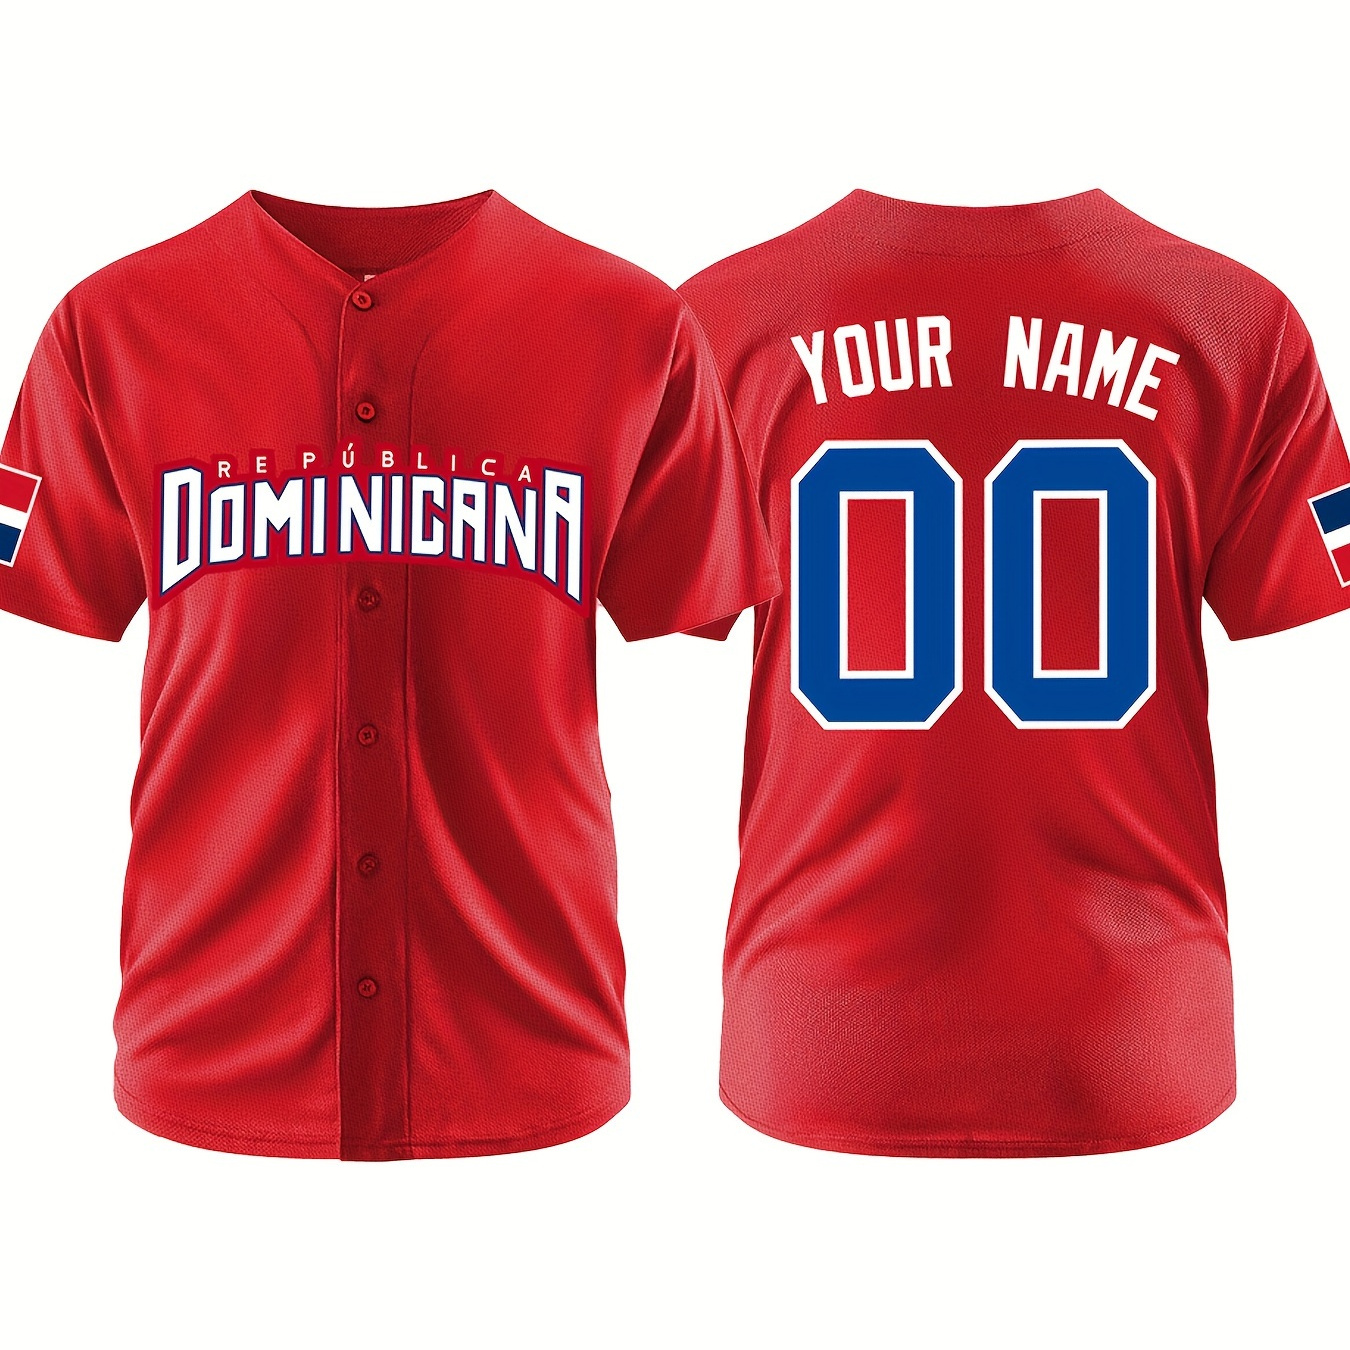 

Customized Name And Number Design, Men's Dominican Embroidery Design Short Sleeve Loose Breathable V-neck Baseball Jersey, Sports Shirt For Team Training